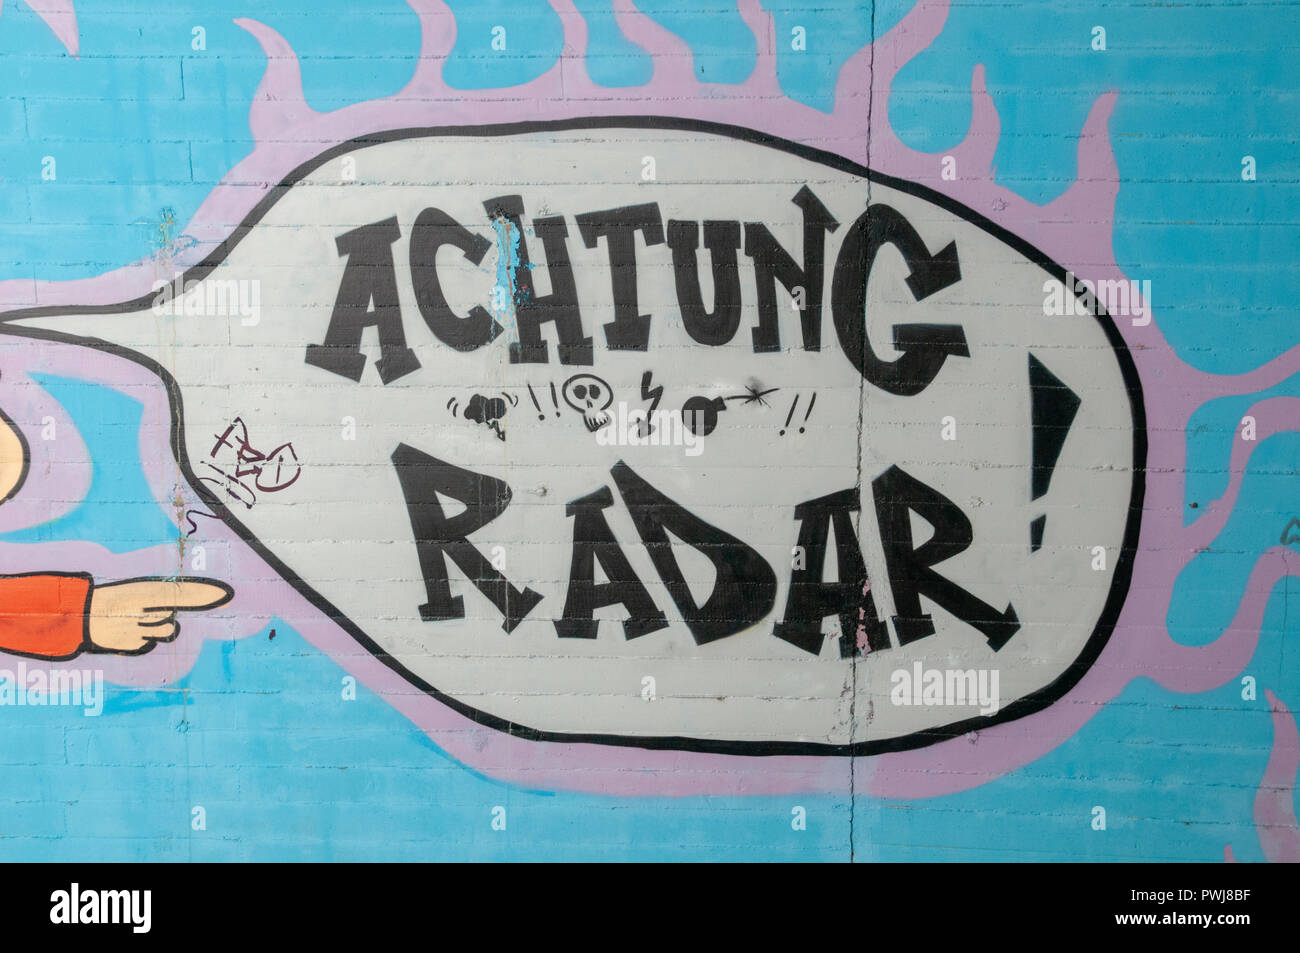 Achtung Radar, Graffiti on a wall in an underpass. Photographed on the Inn River cycling path, Tyrol, Austria Stock Photo